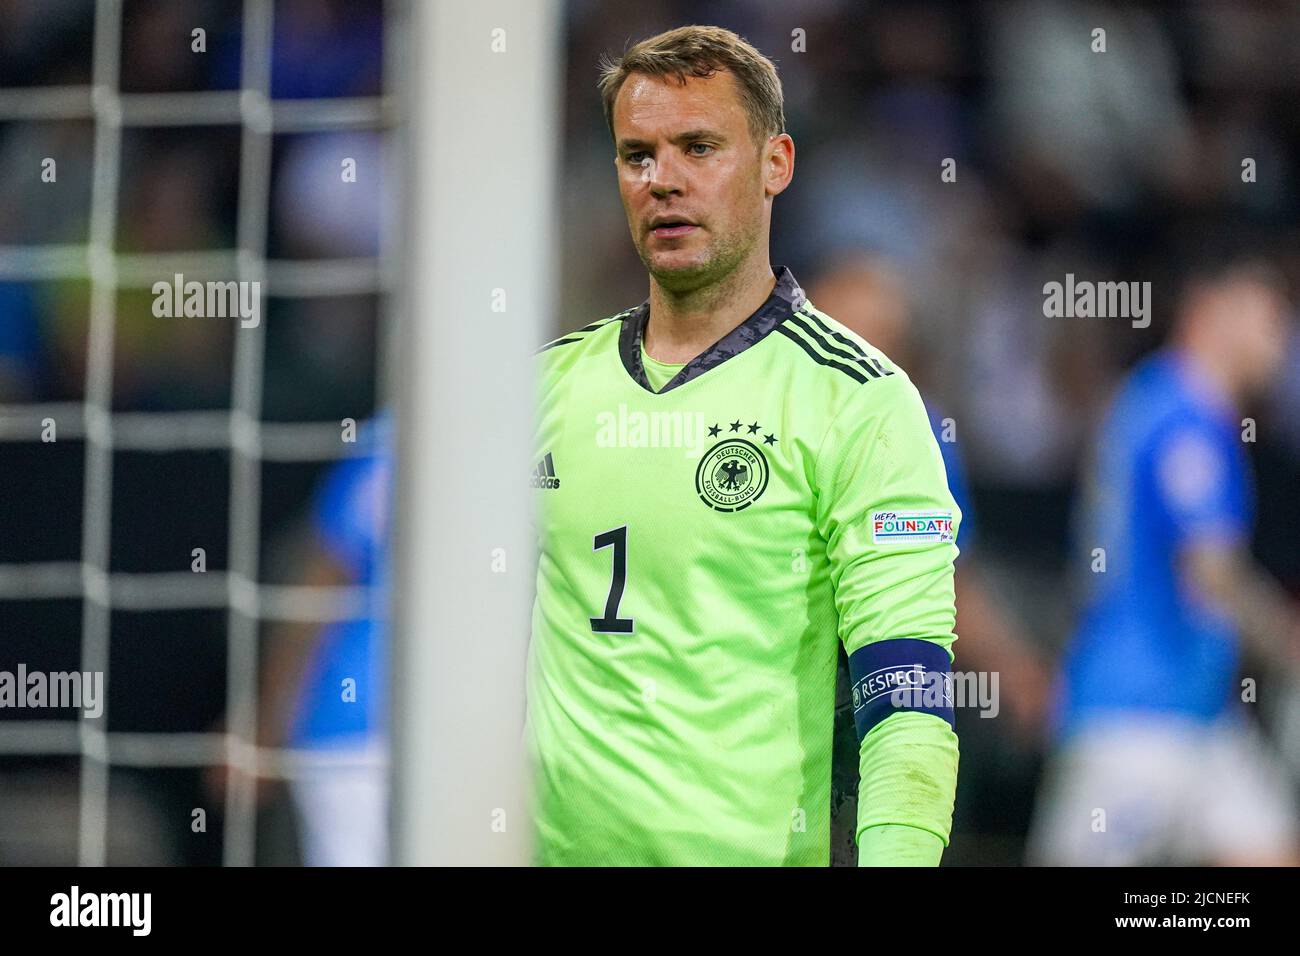 MöNCHENGLADBACH, GERMANY - JUNE 14: goalkeeper Manuel Neuer of Germany during the UEFA Nations League match between Germany and Italy at Borussia-Park on June 14, 2022 in Mönchengladbach, Germany (Photo by Joris Verwijst/Orange Pictures) Stock Photo